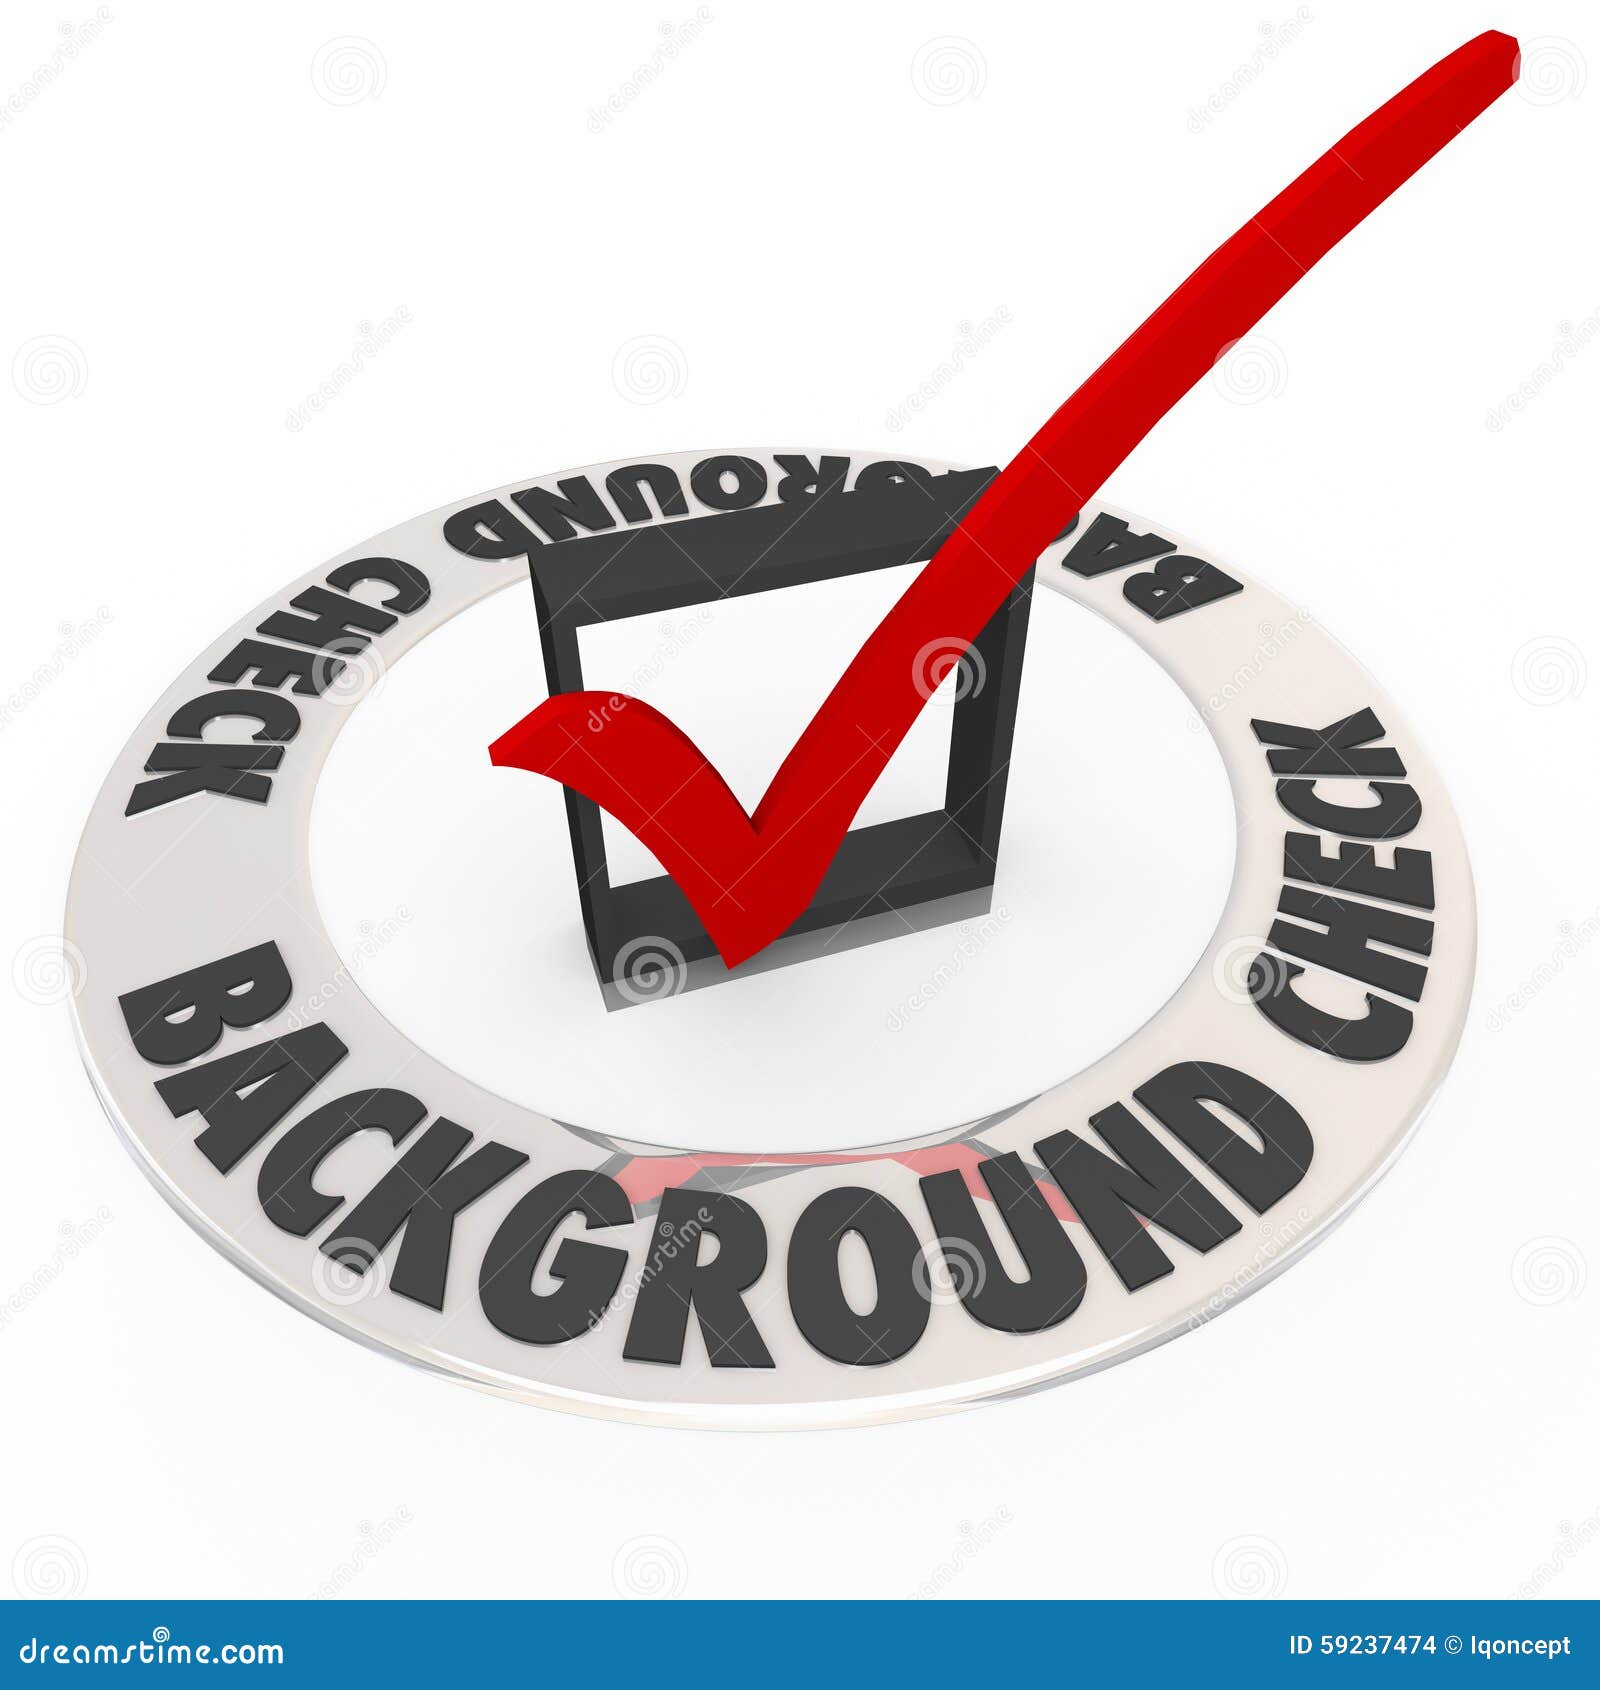 security check clipart - photo #29